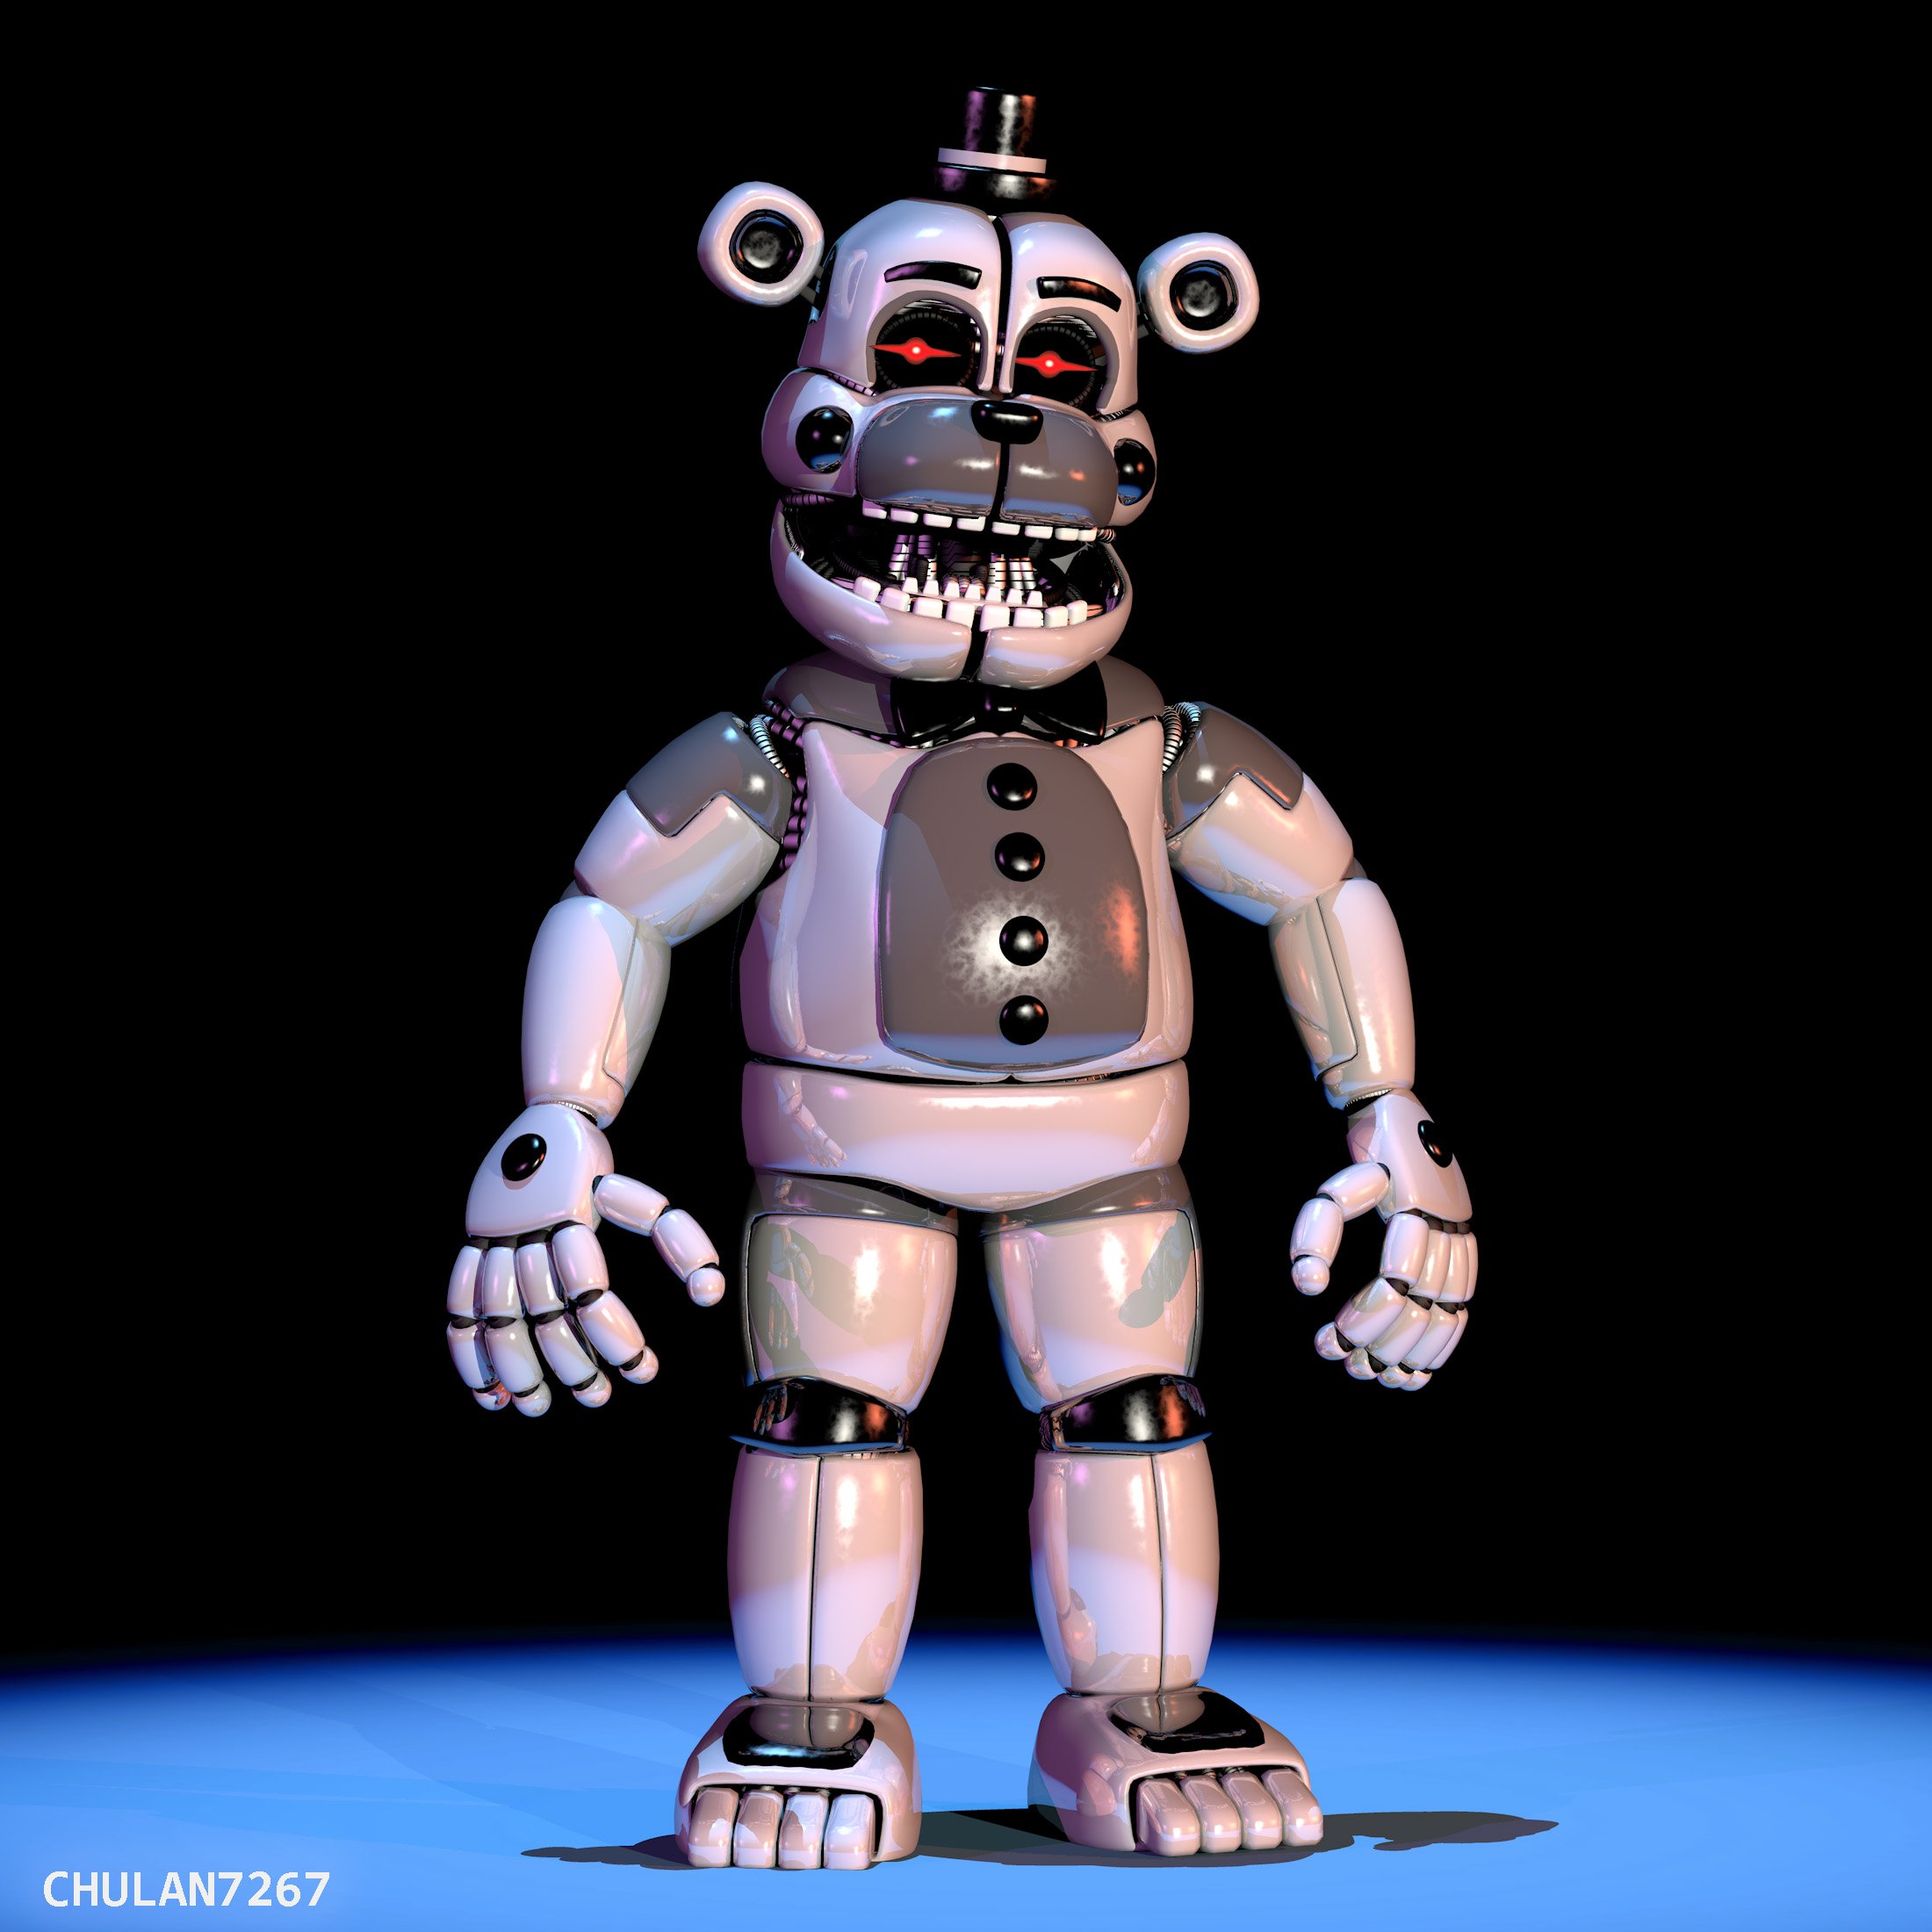 Funtime Chica, OCs of FNaF Wiki